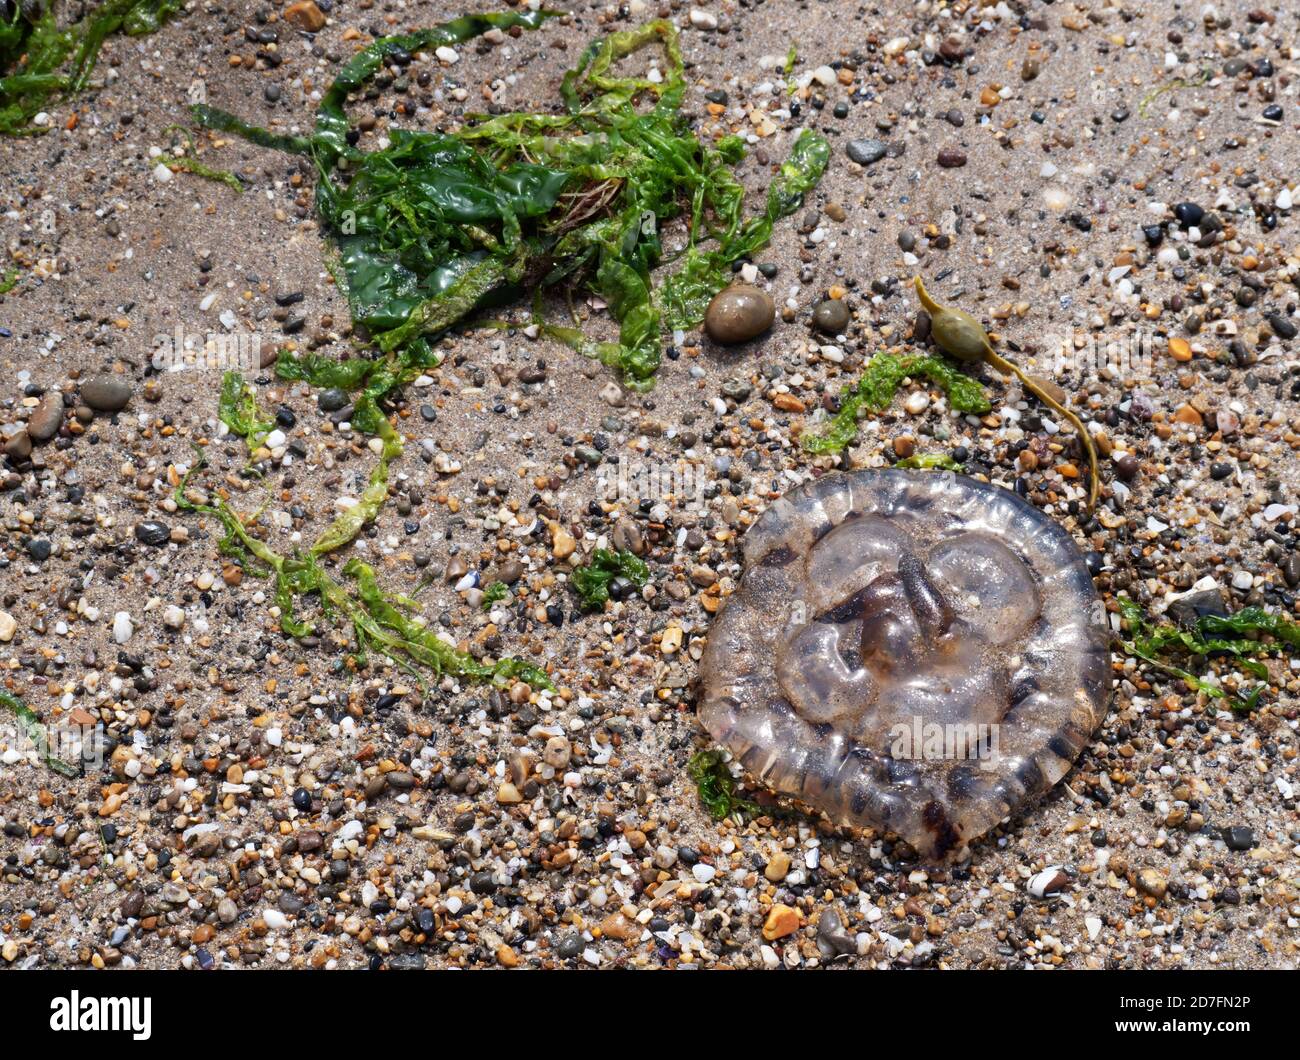 Moon jellyfish washed up on the beach in North Devon, England. Stock Photo